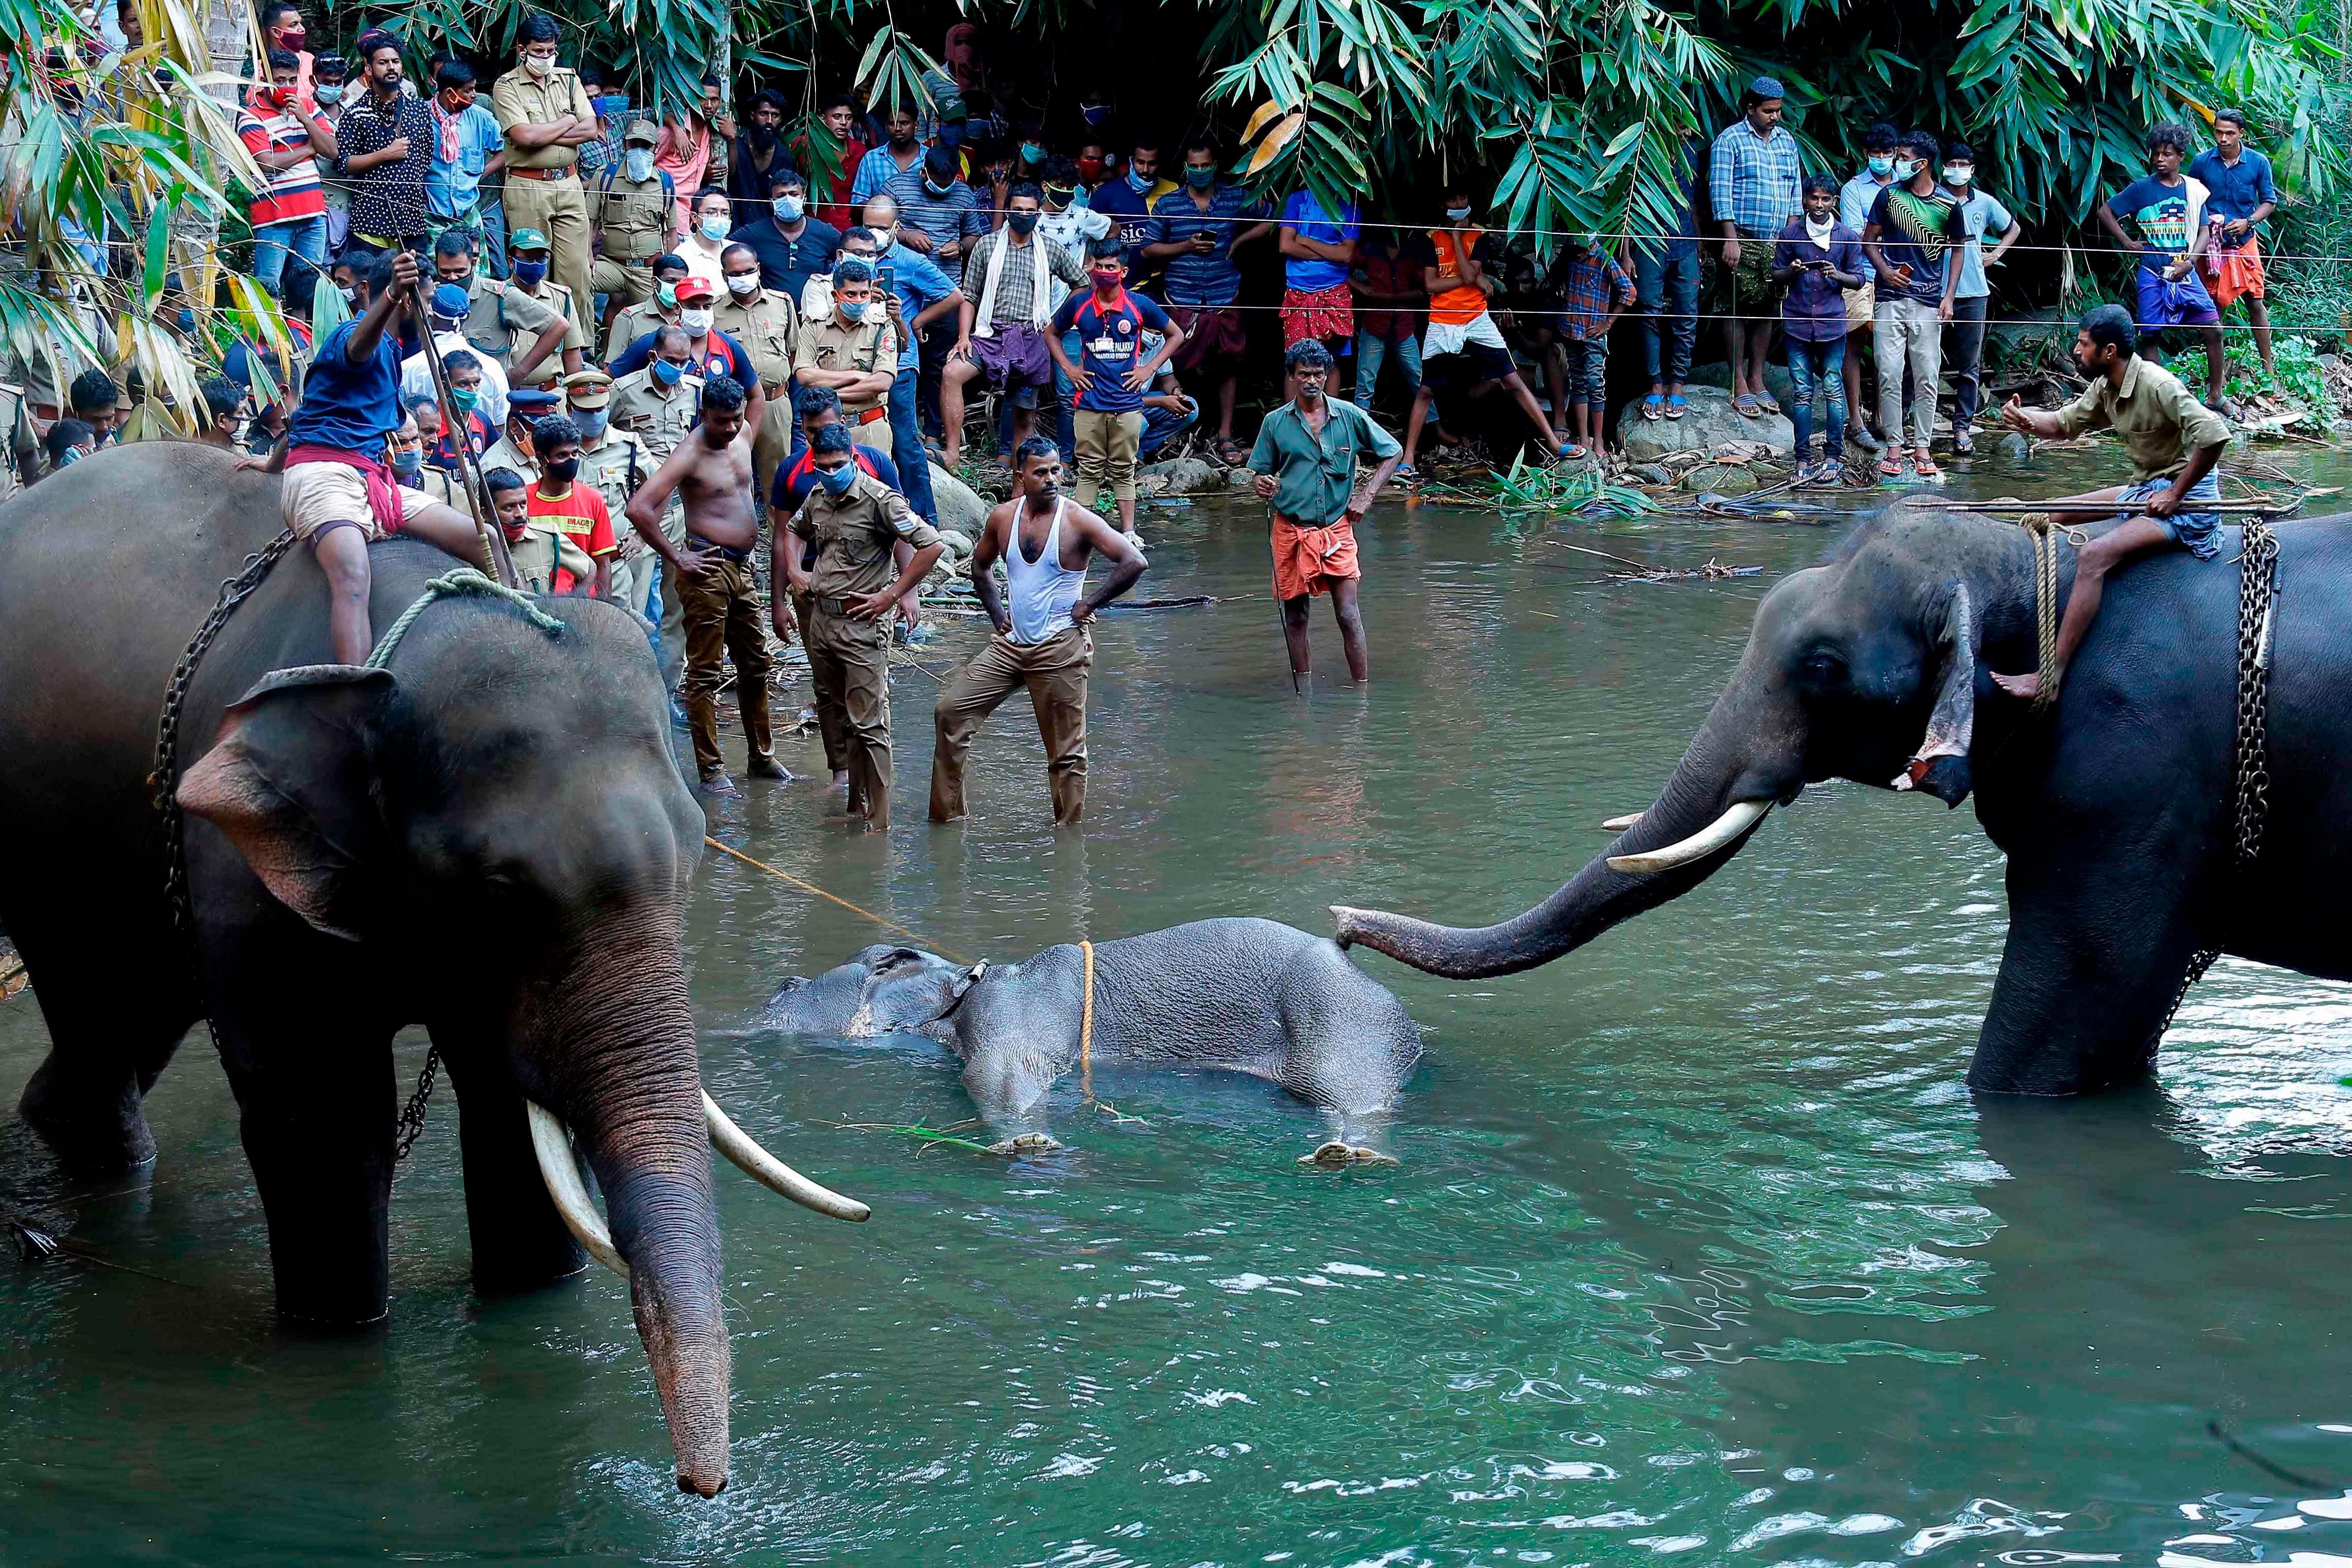 This photograph taken on May 27, 2020 shows policemen and onlookers standing on the banks of the Velliyar River in Palakkad district of Kerala state as a dead wild elephant (C), which was pregnant, is retrieved following injuries caused when locals fed the elephant a pineapple filled with firecrackers as it wondered into a village searching for food. Credit: AFP